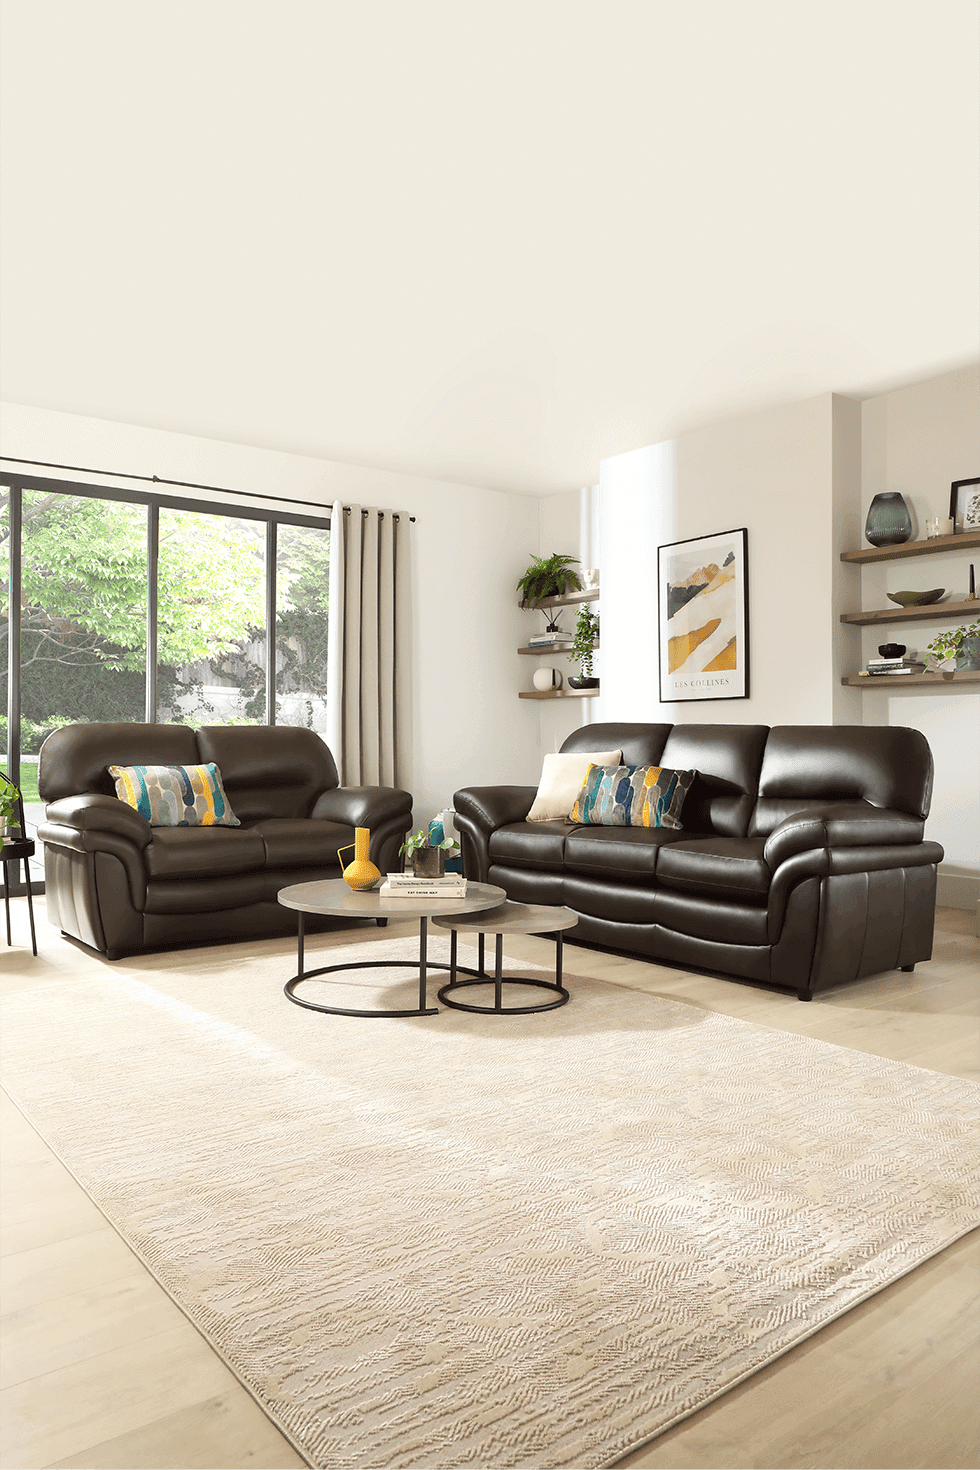 A brown leather sofa set in a neutral living room with wood flooring and yellow and green accessories